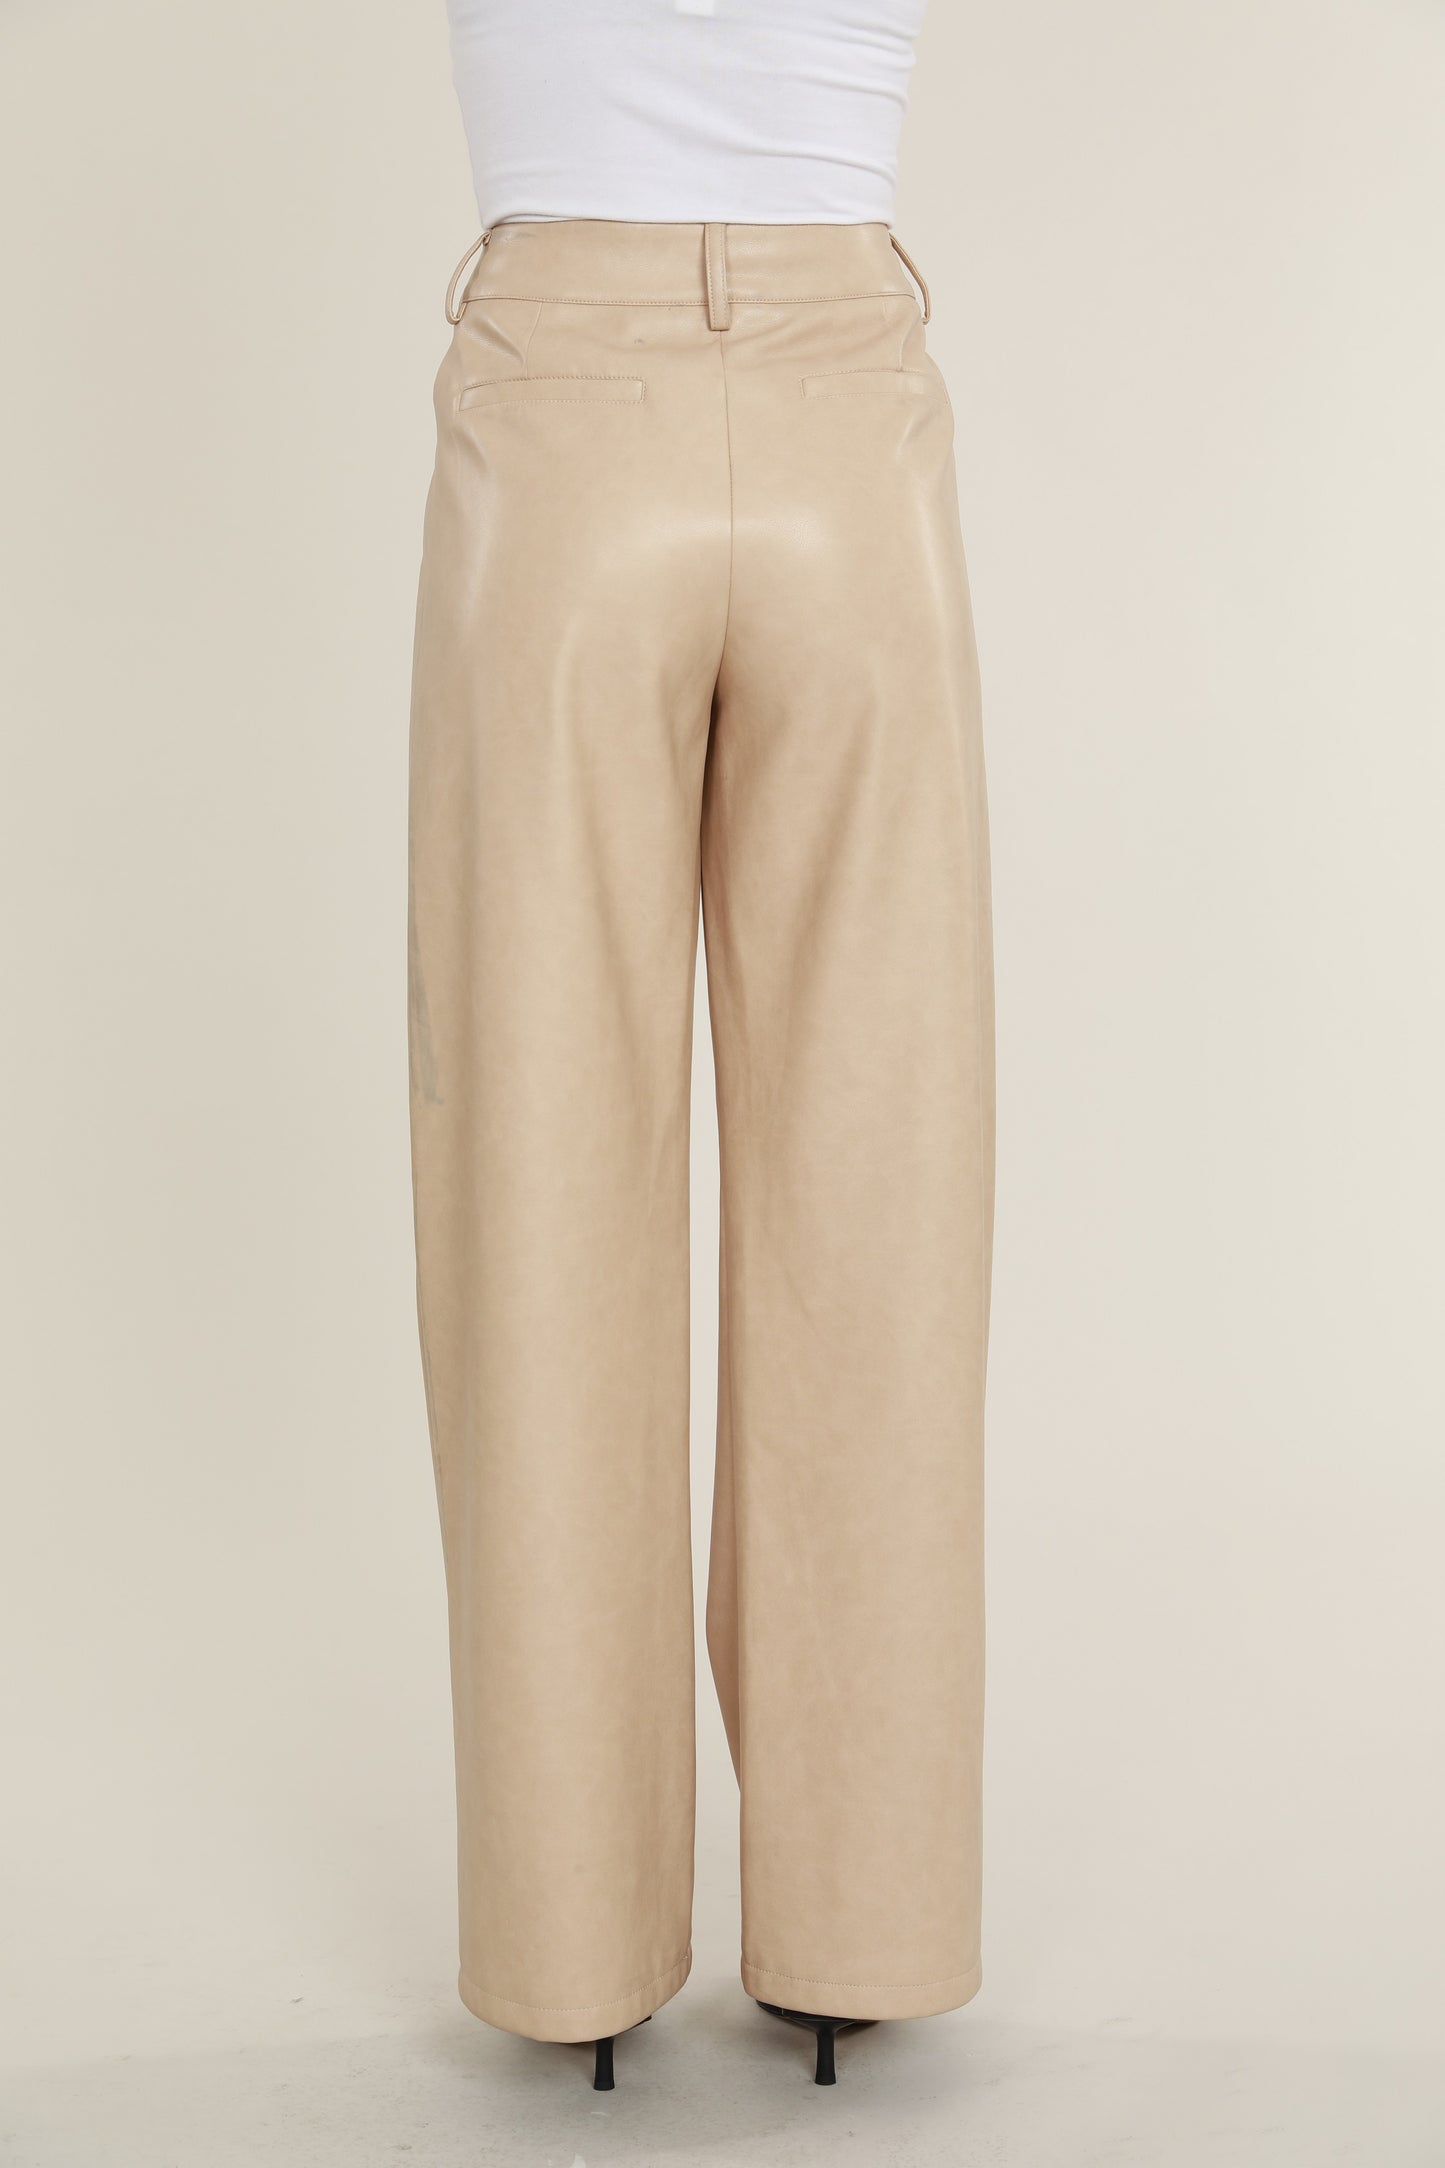 Load image into Gallery viewer, Vegan Leather Wide Leg Pant
